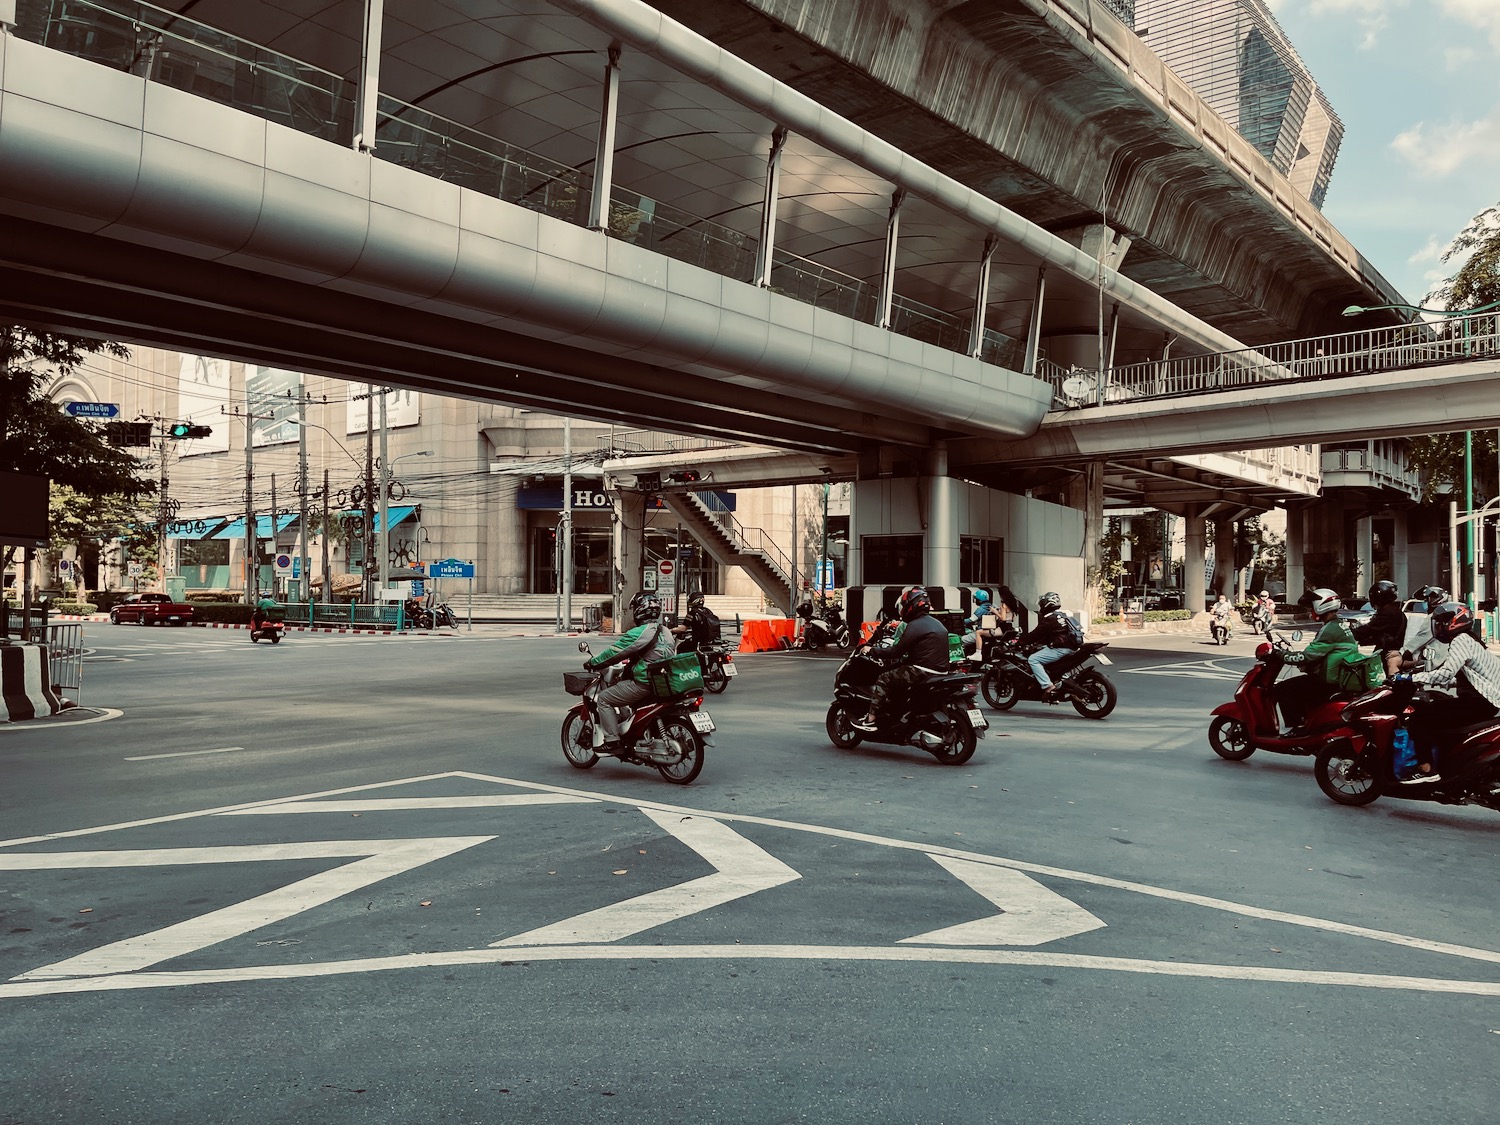 a group of people on motorcycles in a city